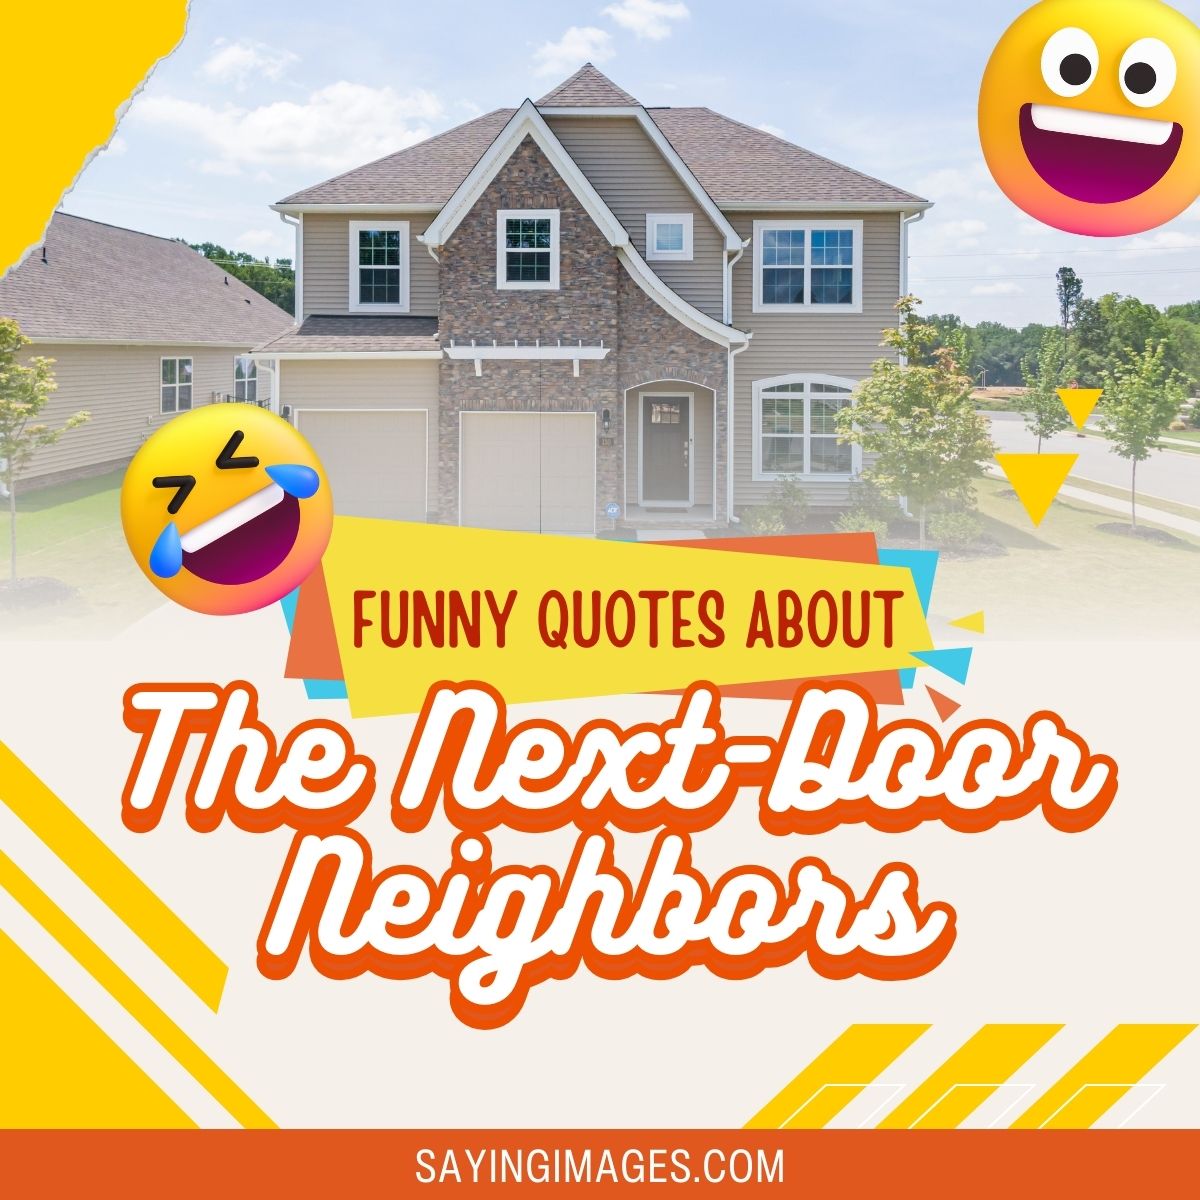 Funny Quotes About The Next-Door Neighbors